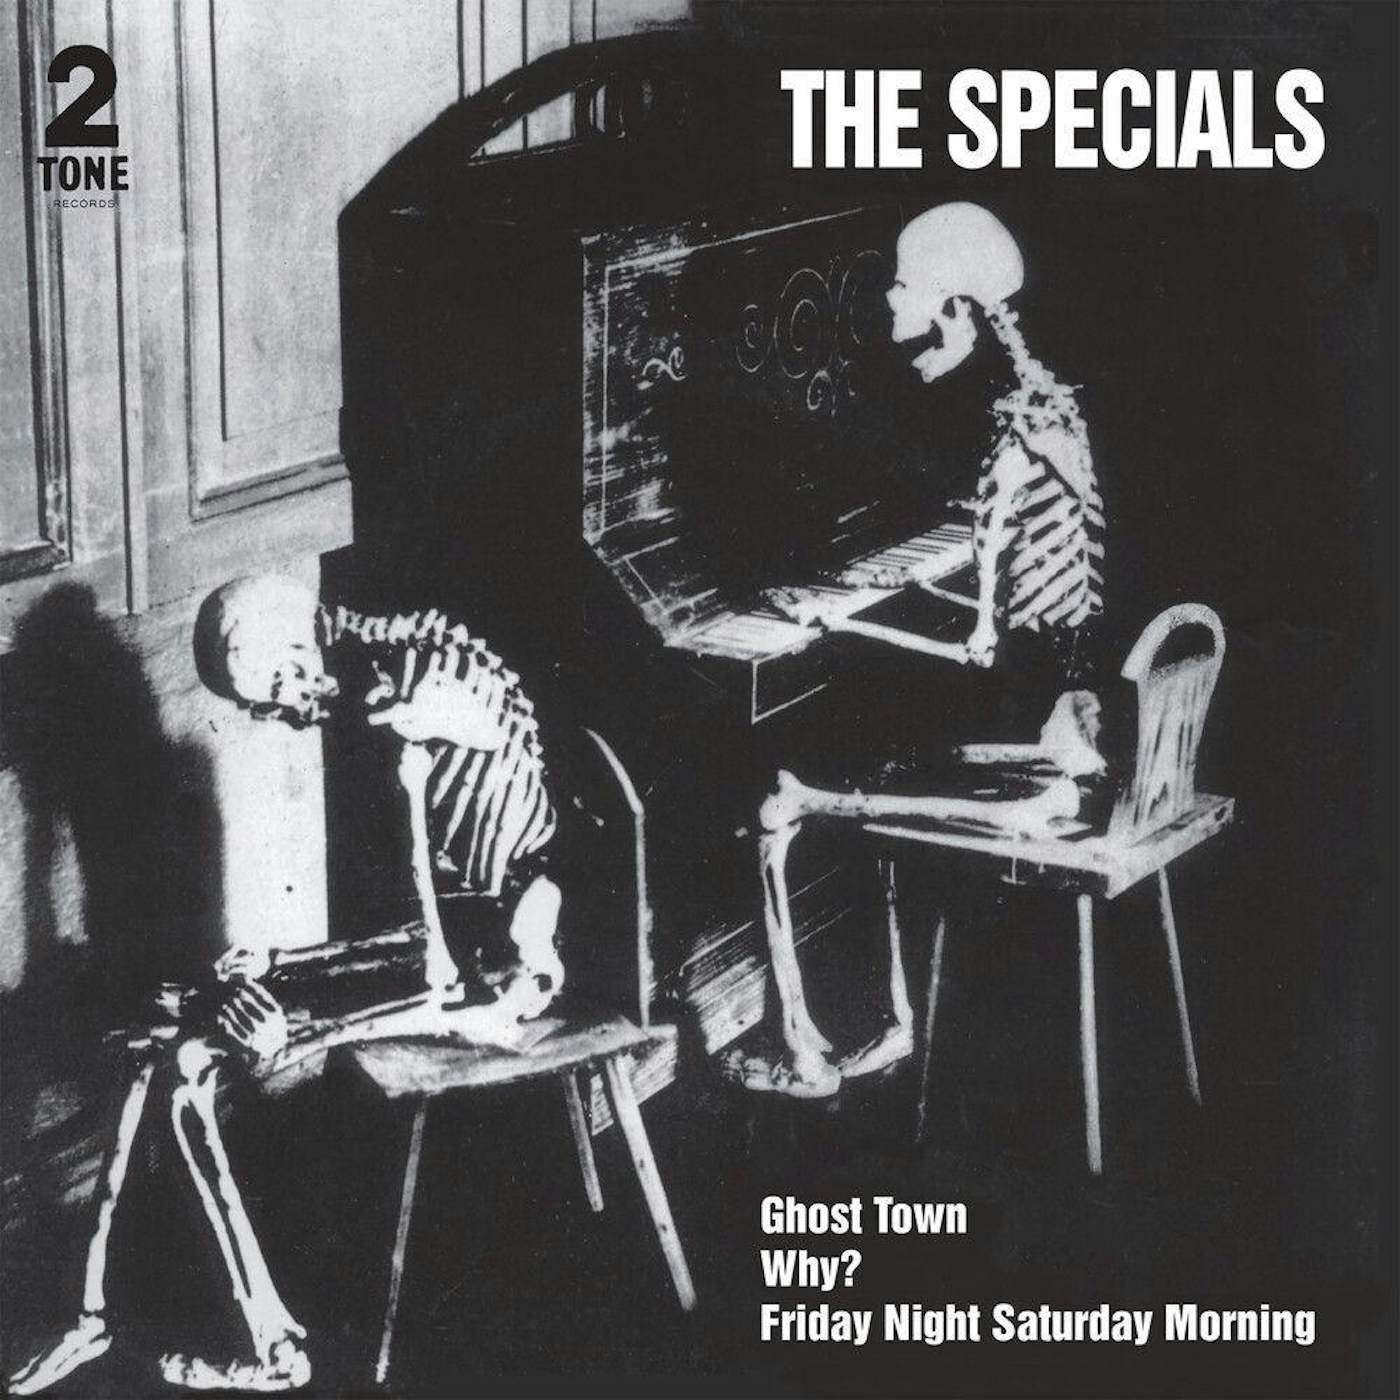 The Specials GHOST TOWN (40TH ANNIVERSARY HALF SPEED MASTER) Vinyl Record